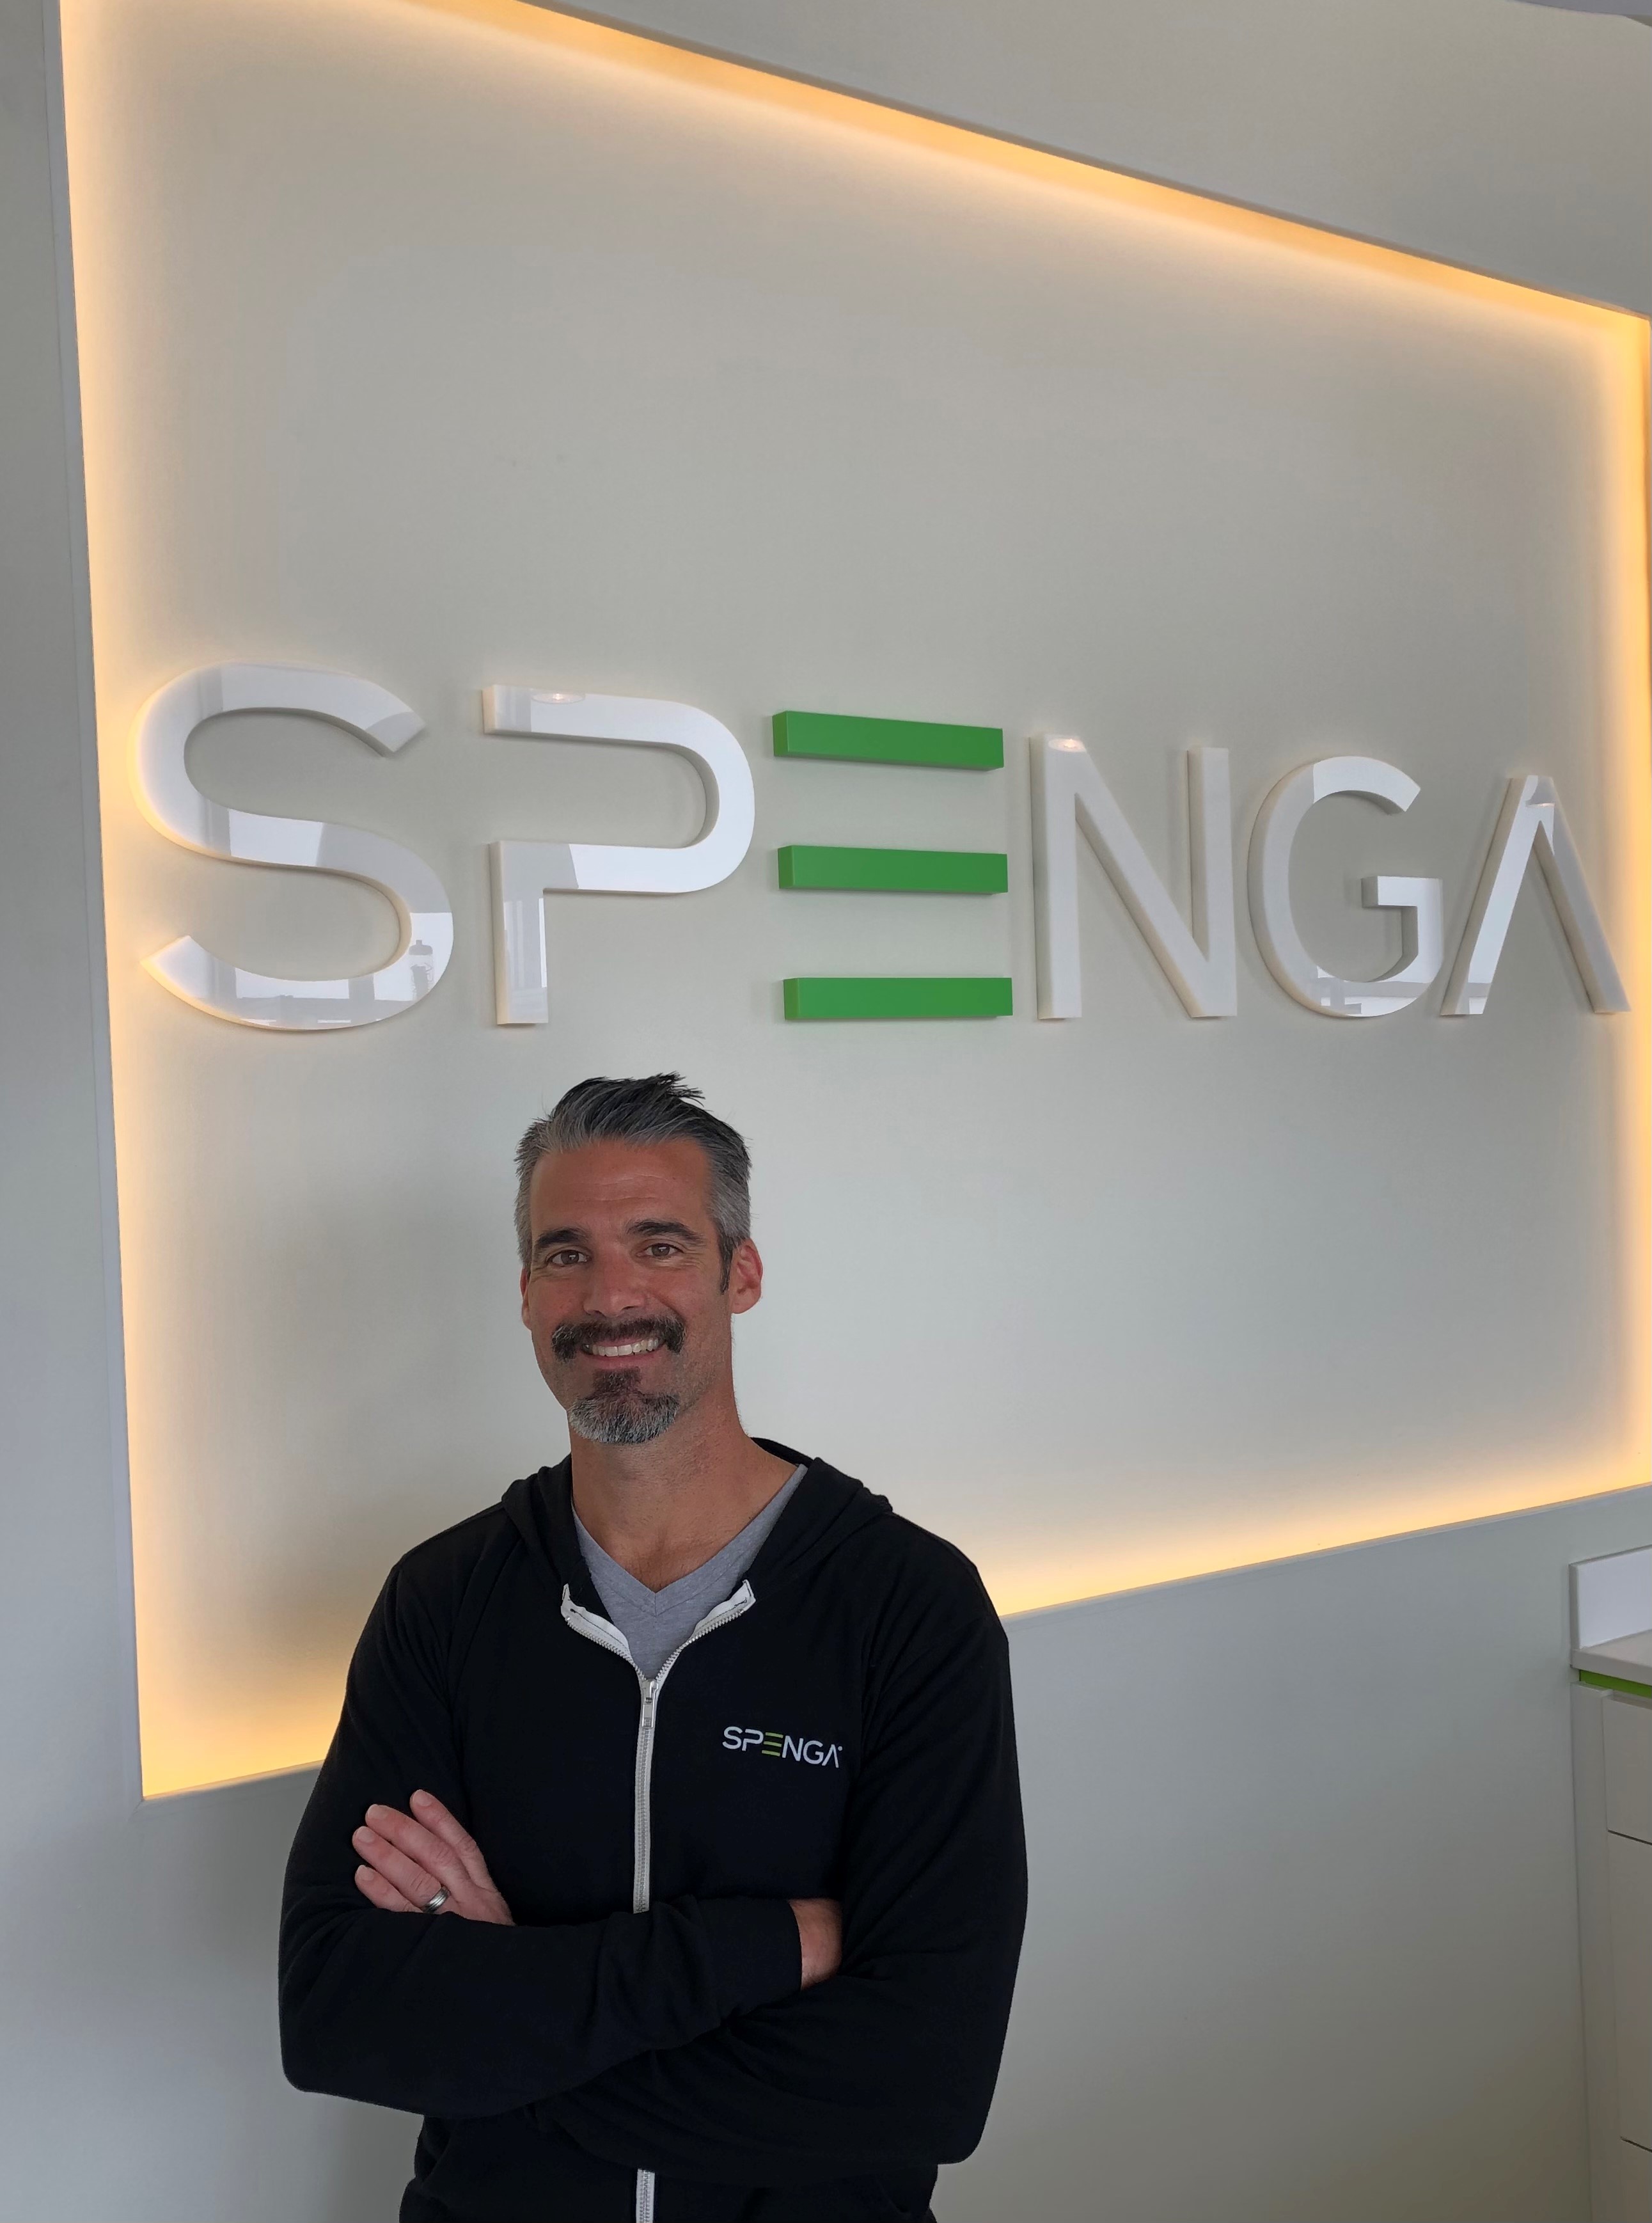 This program was crucial for David Ohio's New Small Business Grant program was crucial for David  Wildner, whose Spenga fitness training center franchise in West Chester Twp. opened in February 2020 and was forced to close 19 days later because of government mandated shutdowns.